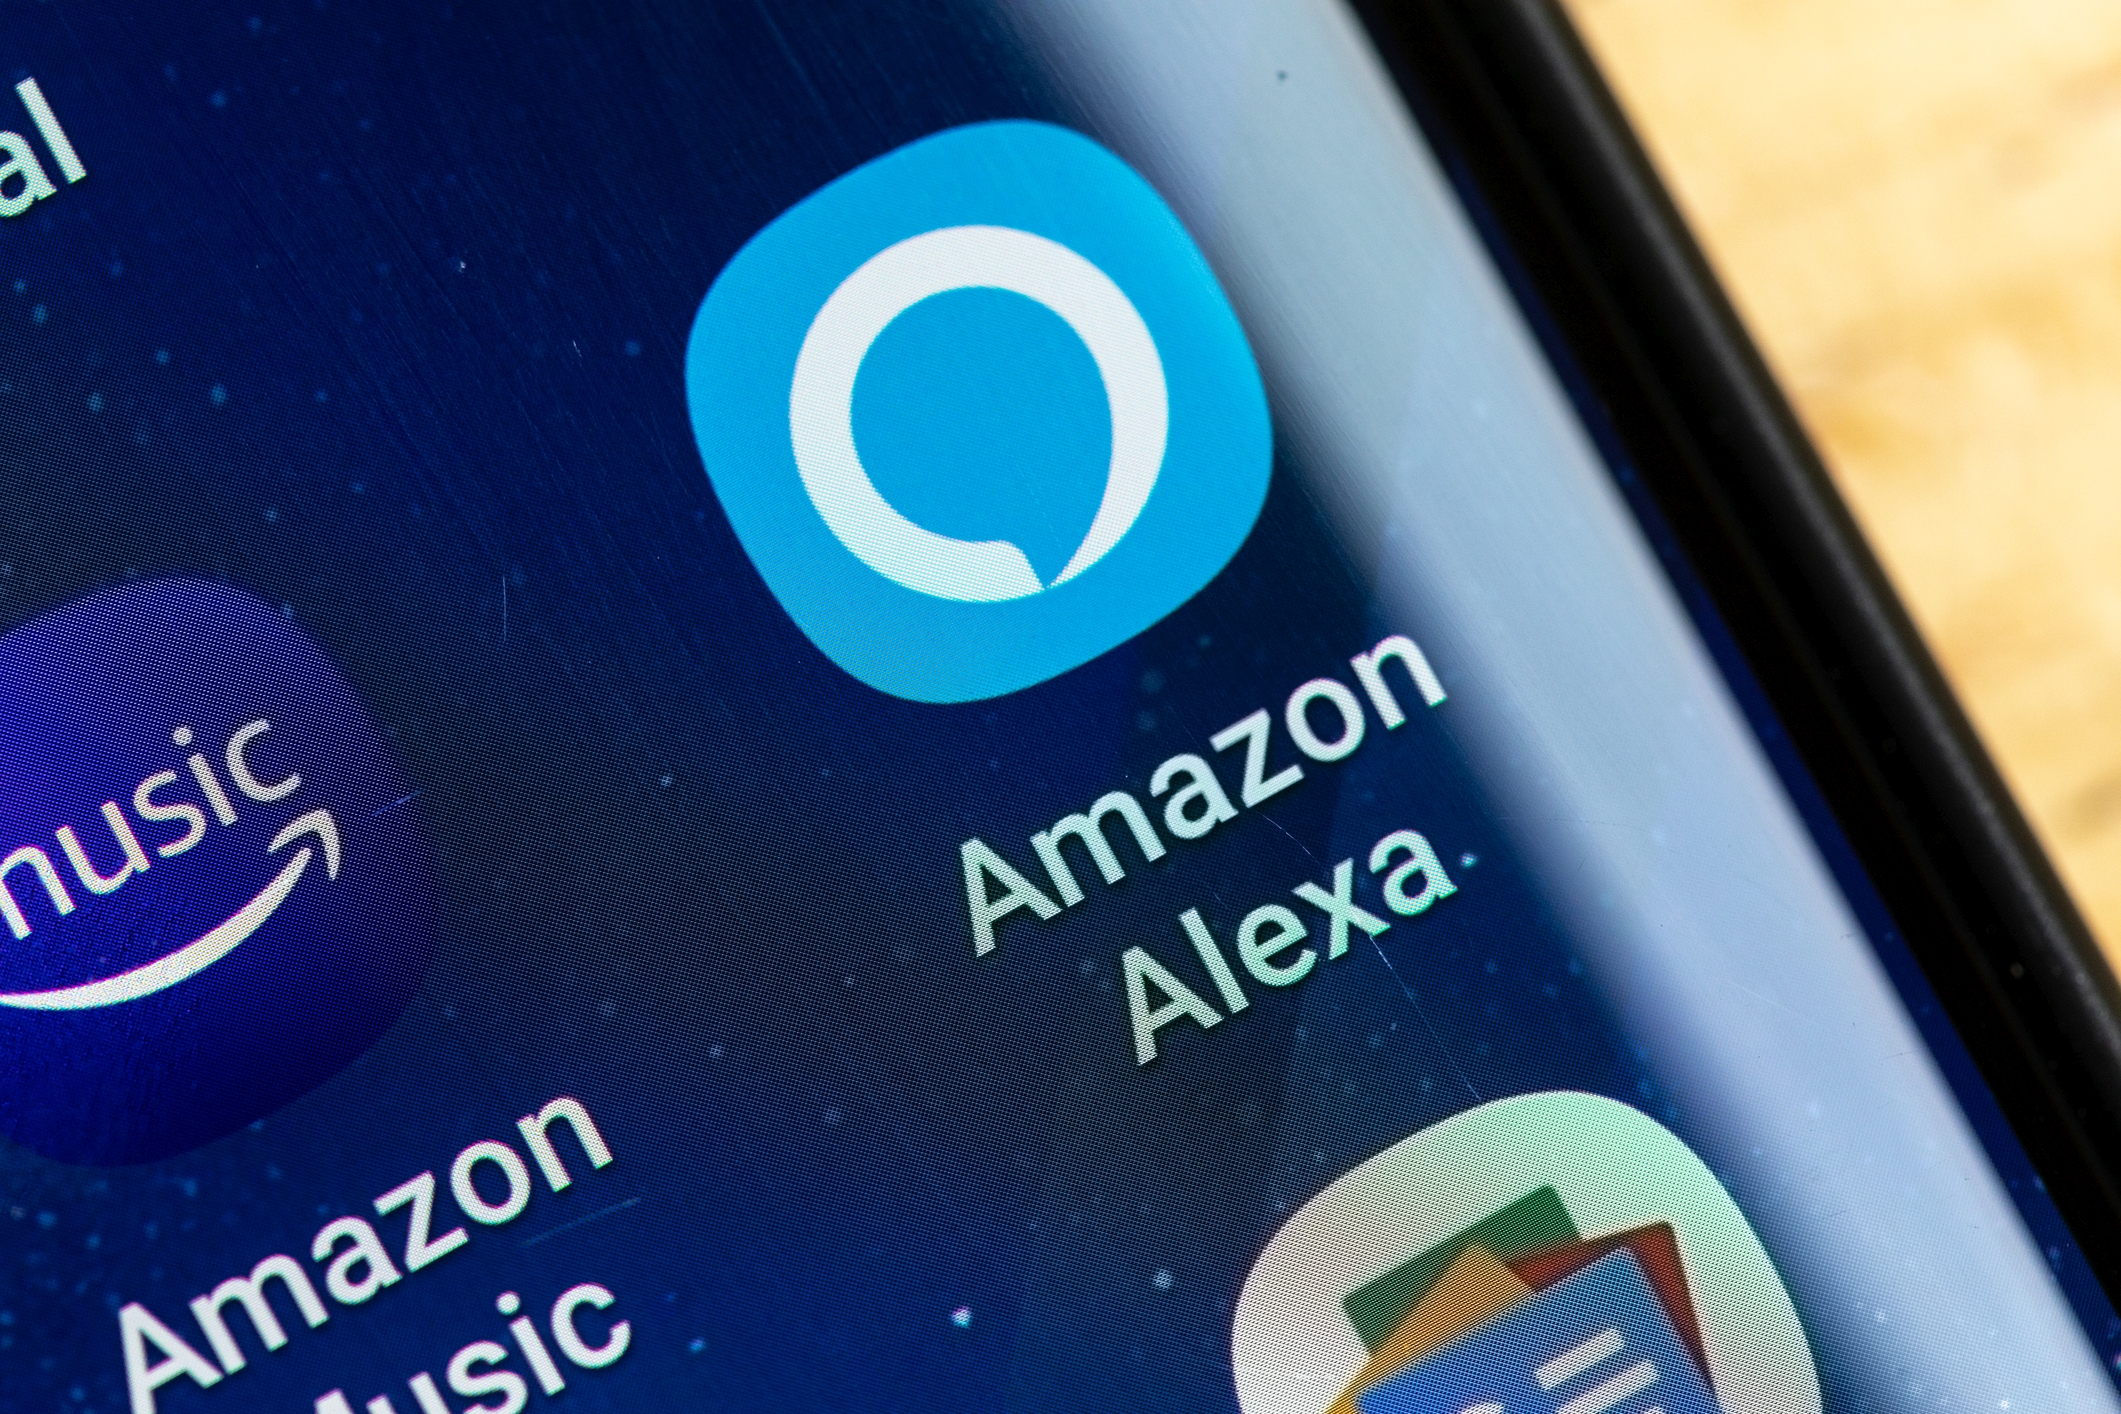 Alexa's also available on cellphones, naturally